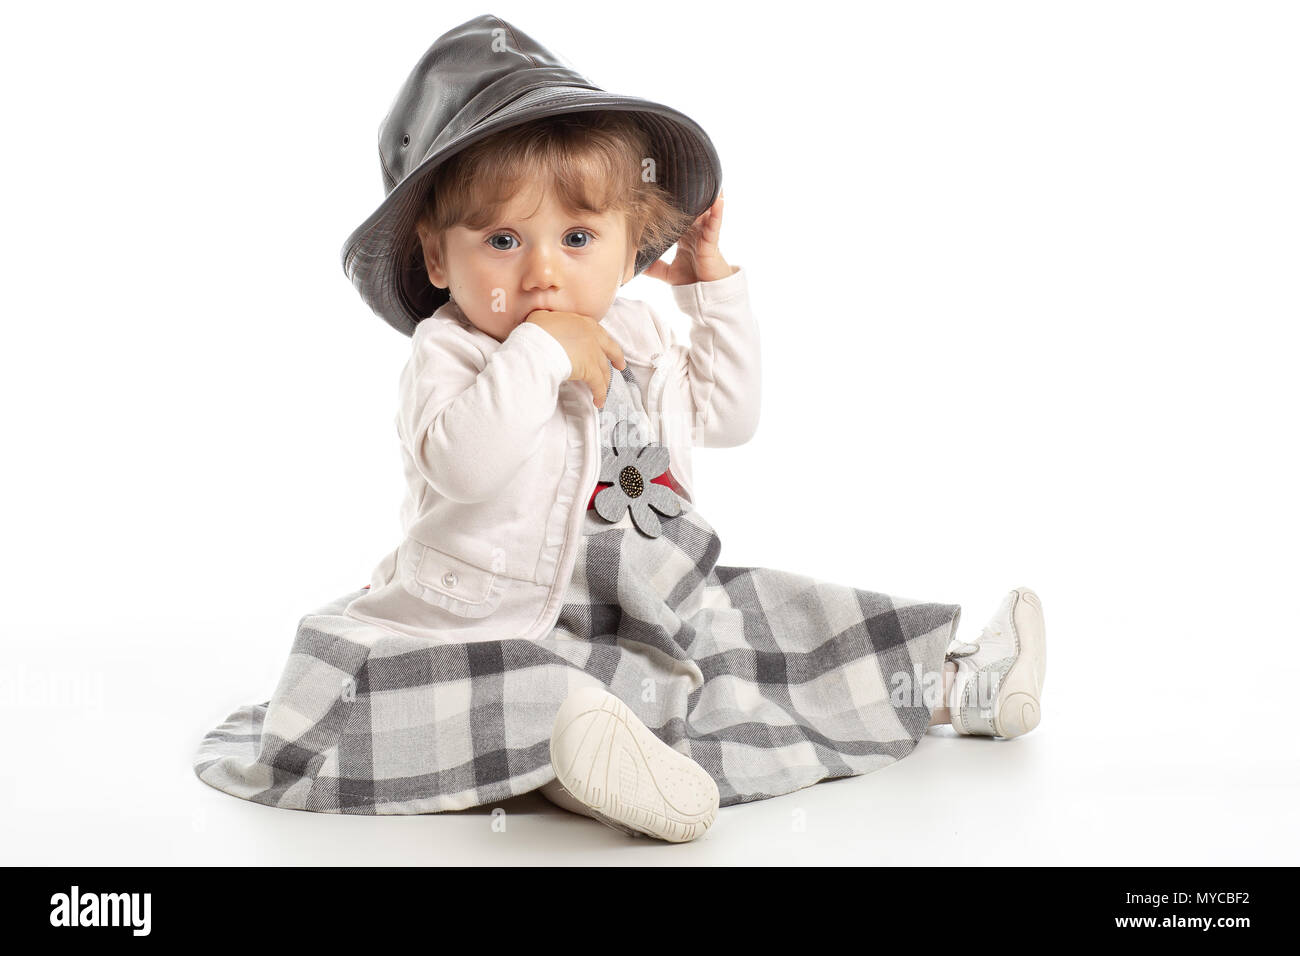 Elegant Happy baby girl 1 year old sitting on the studio floor with black leather hat. White Background. Concept Happiness. Stock Photo